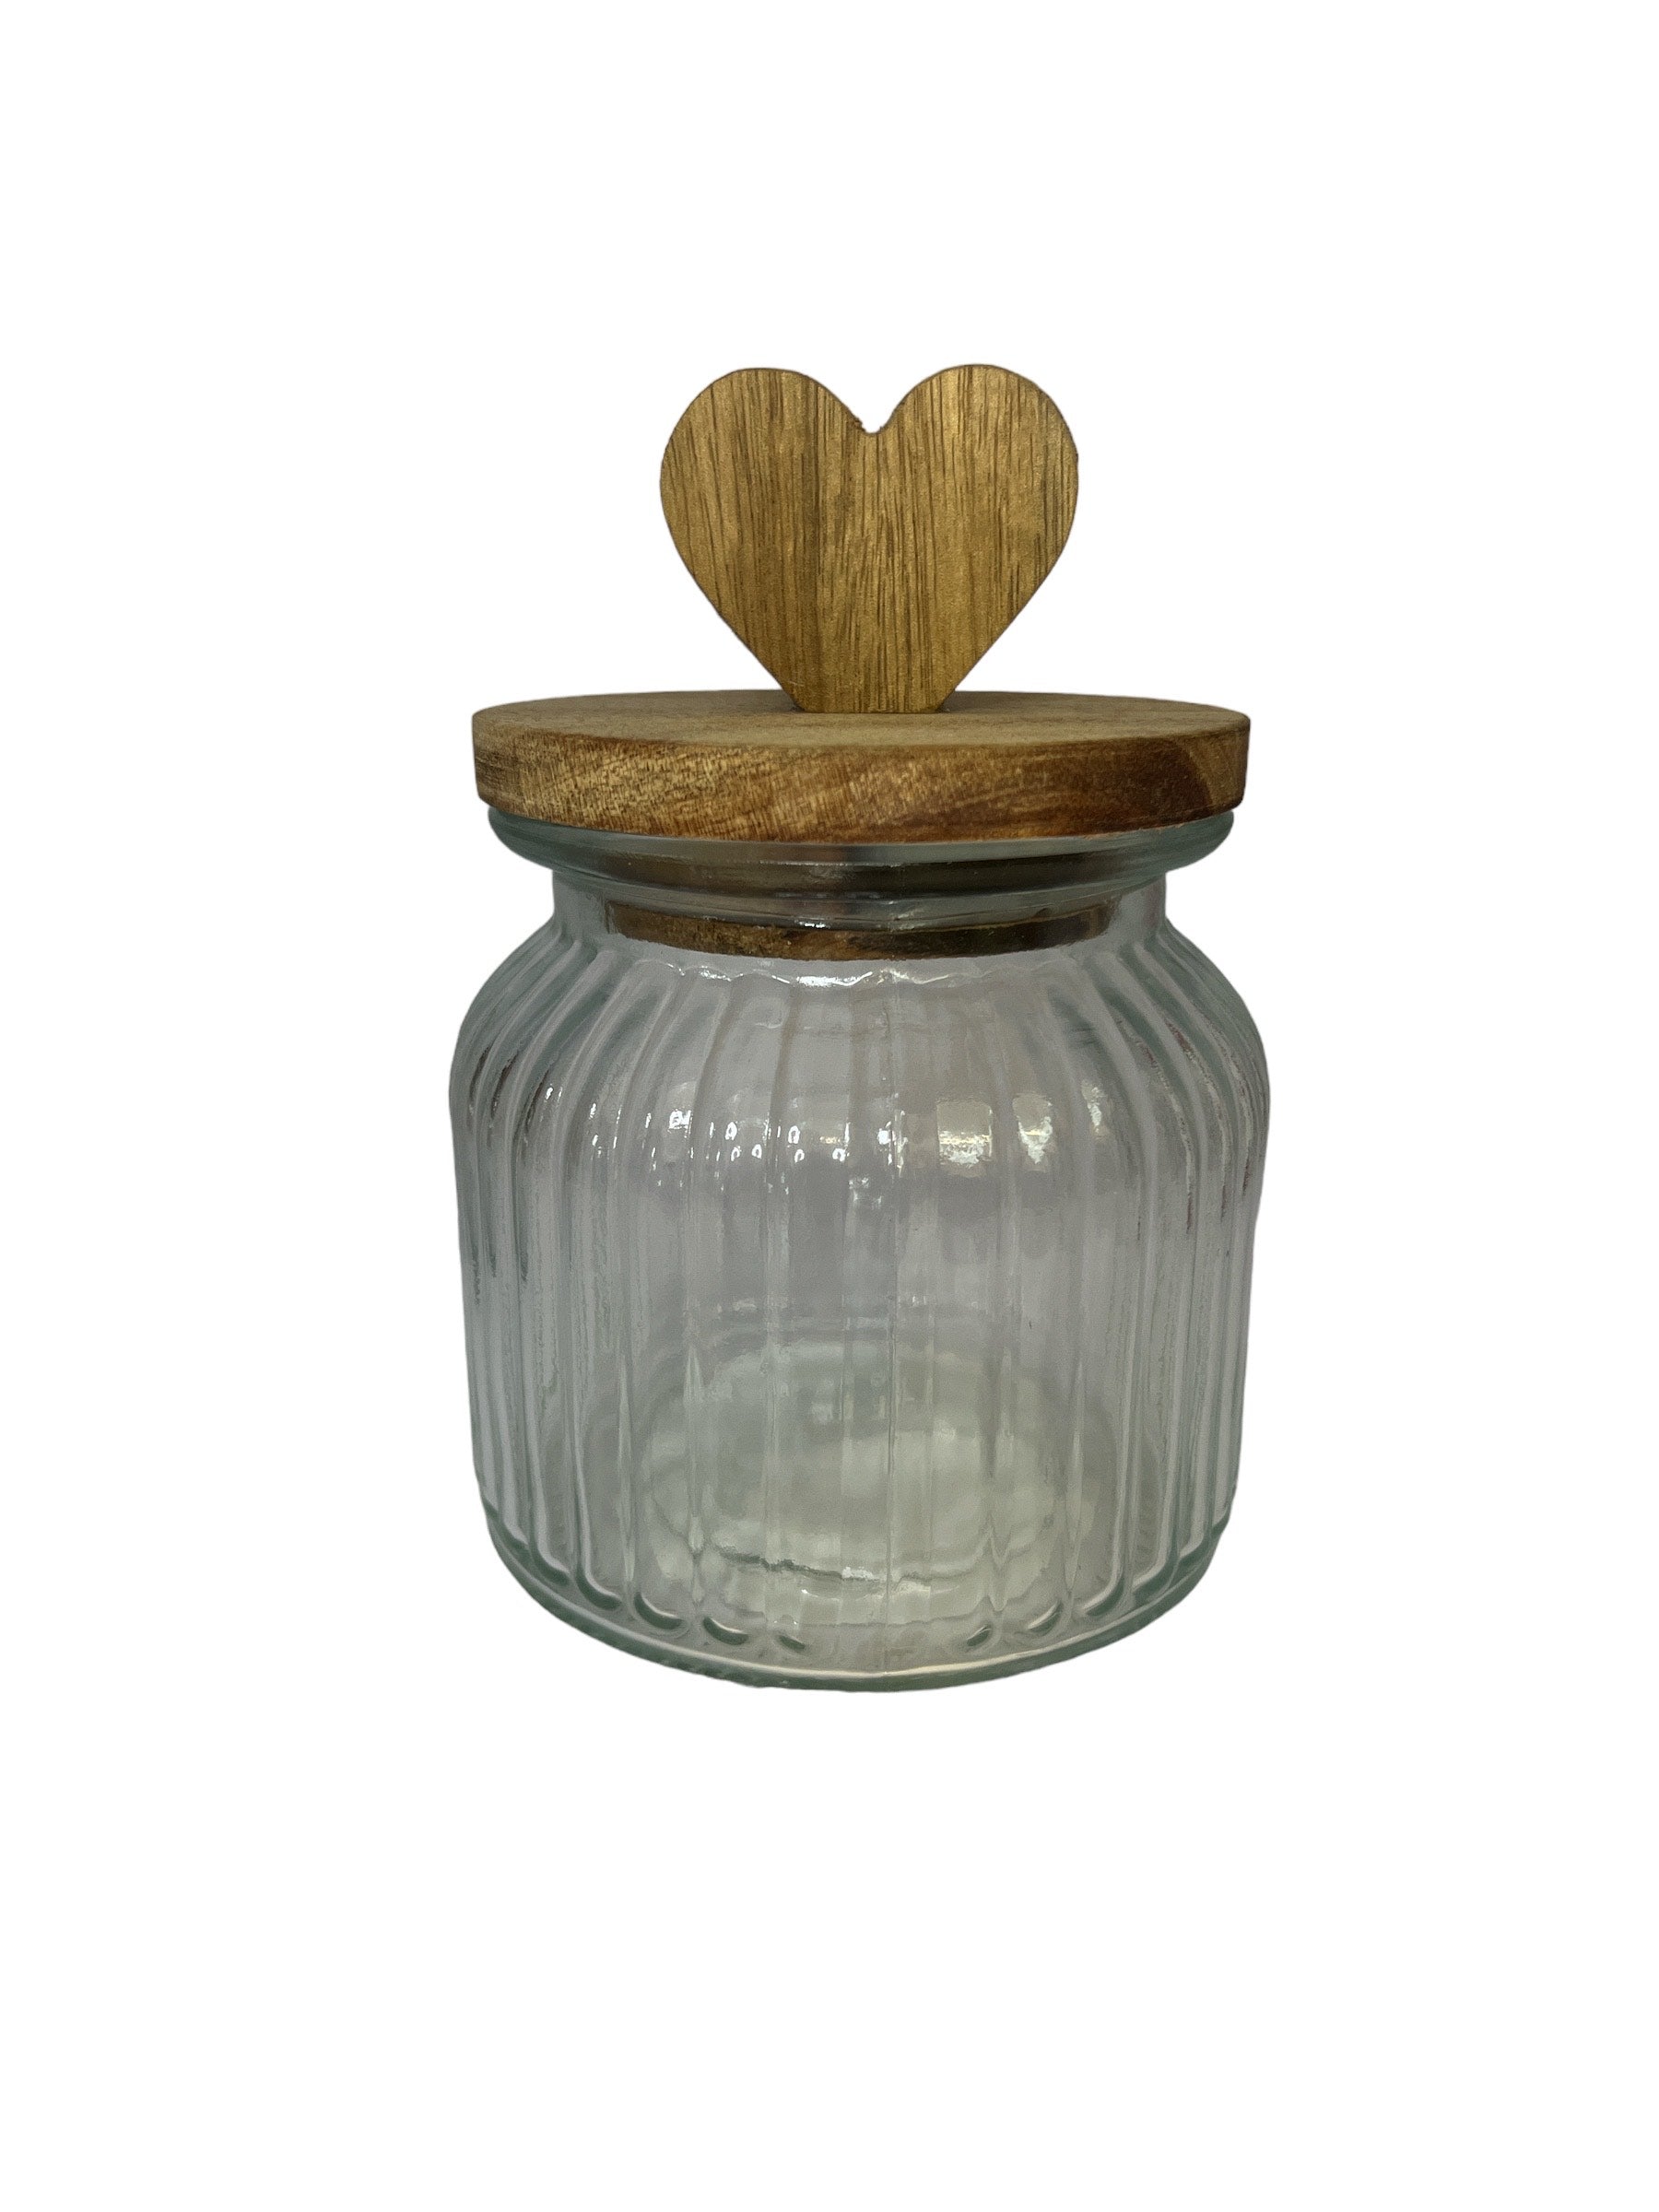 Glass Storage Jar with Wooden Heart Lid Detail